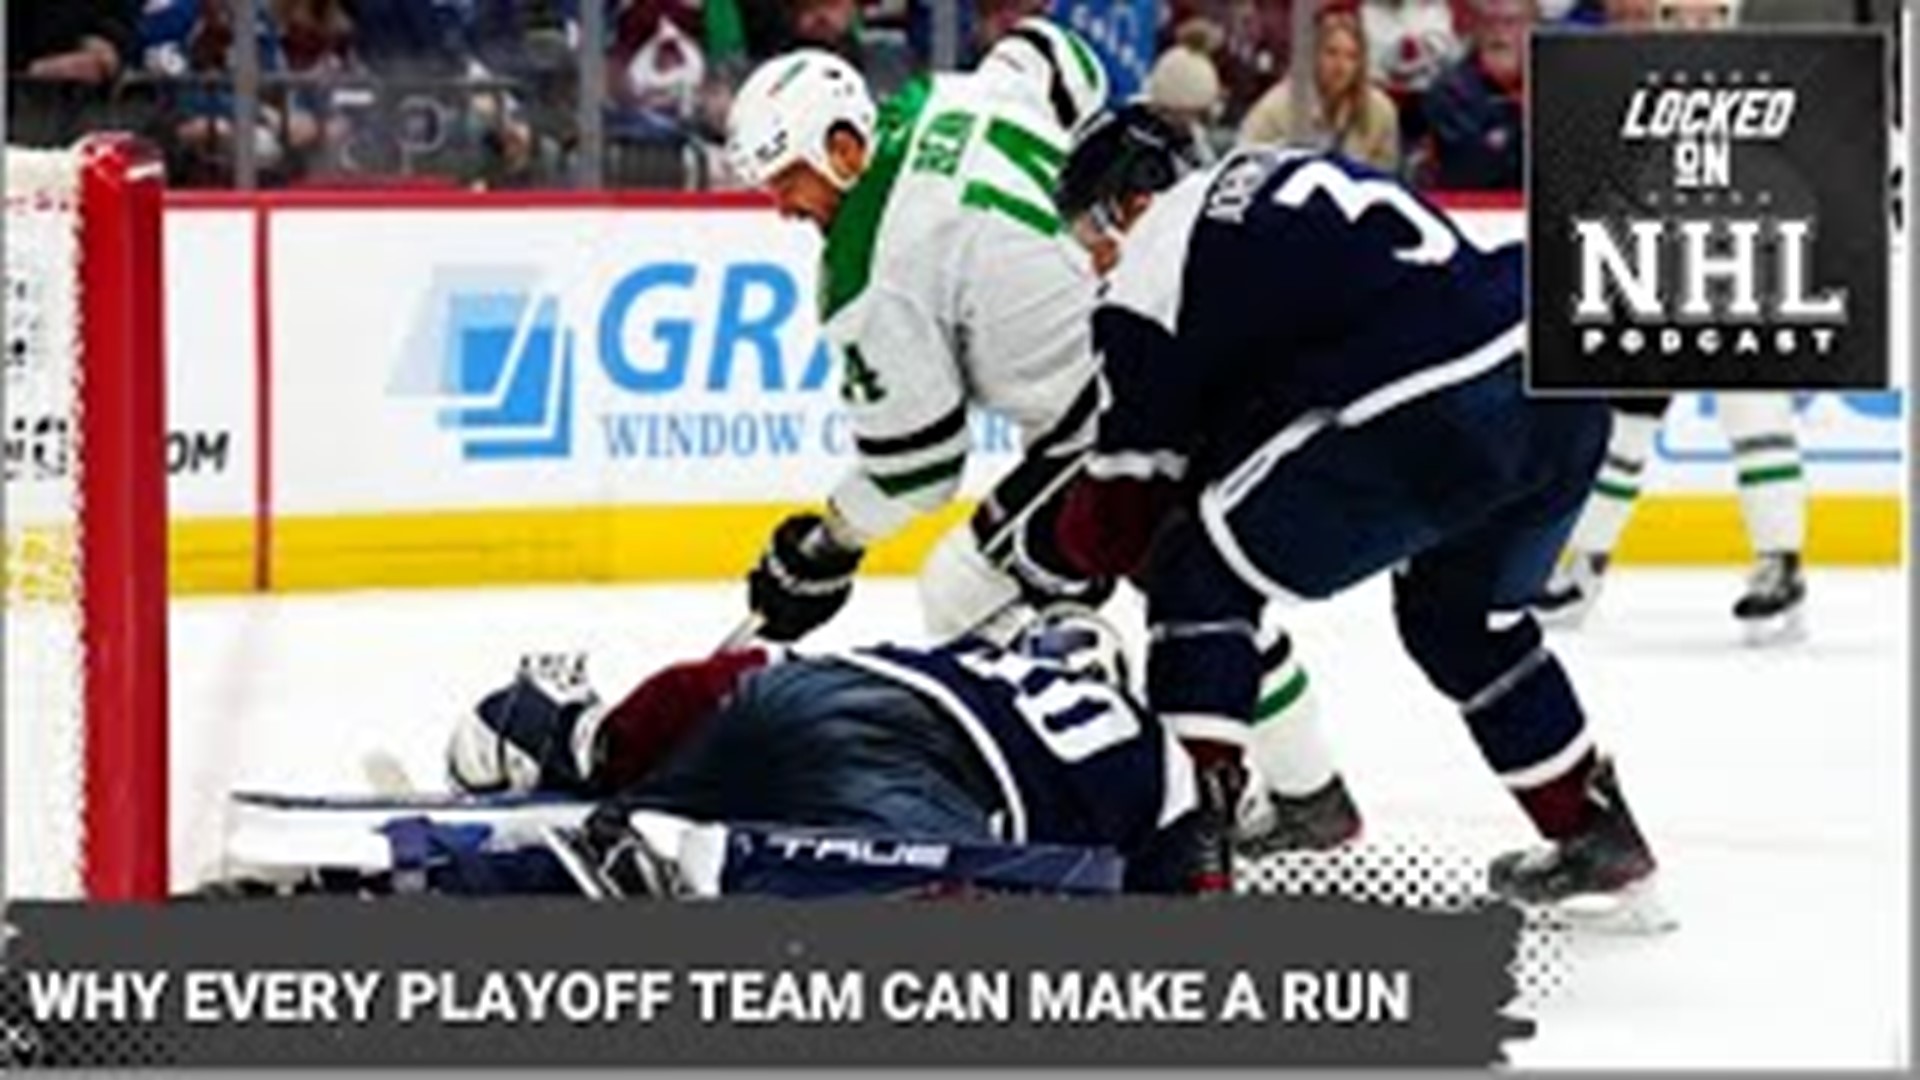 With a little over two weeks remaining in the NHL regular season, the playoff teams, aside from the second wild card in the eastern conference are locked in